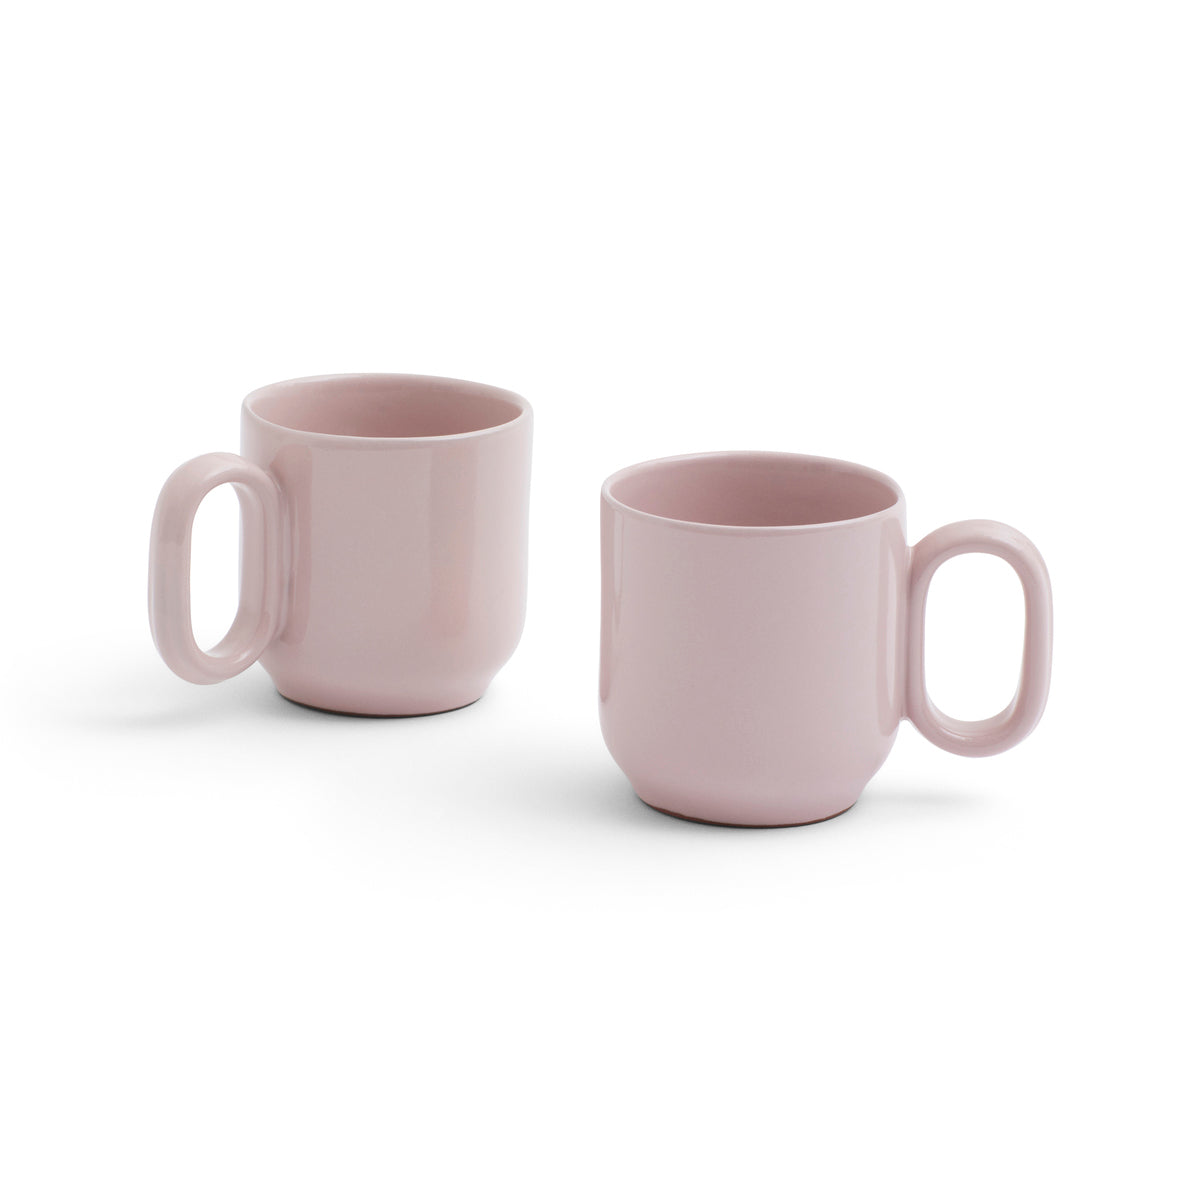 Clay cup set of 2